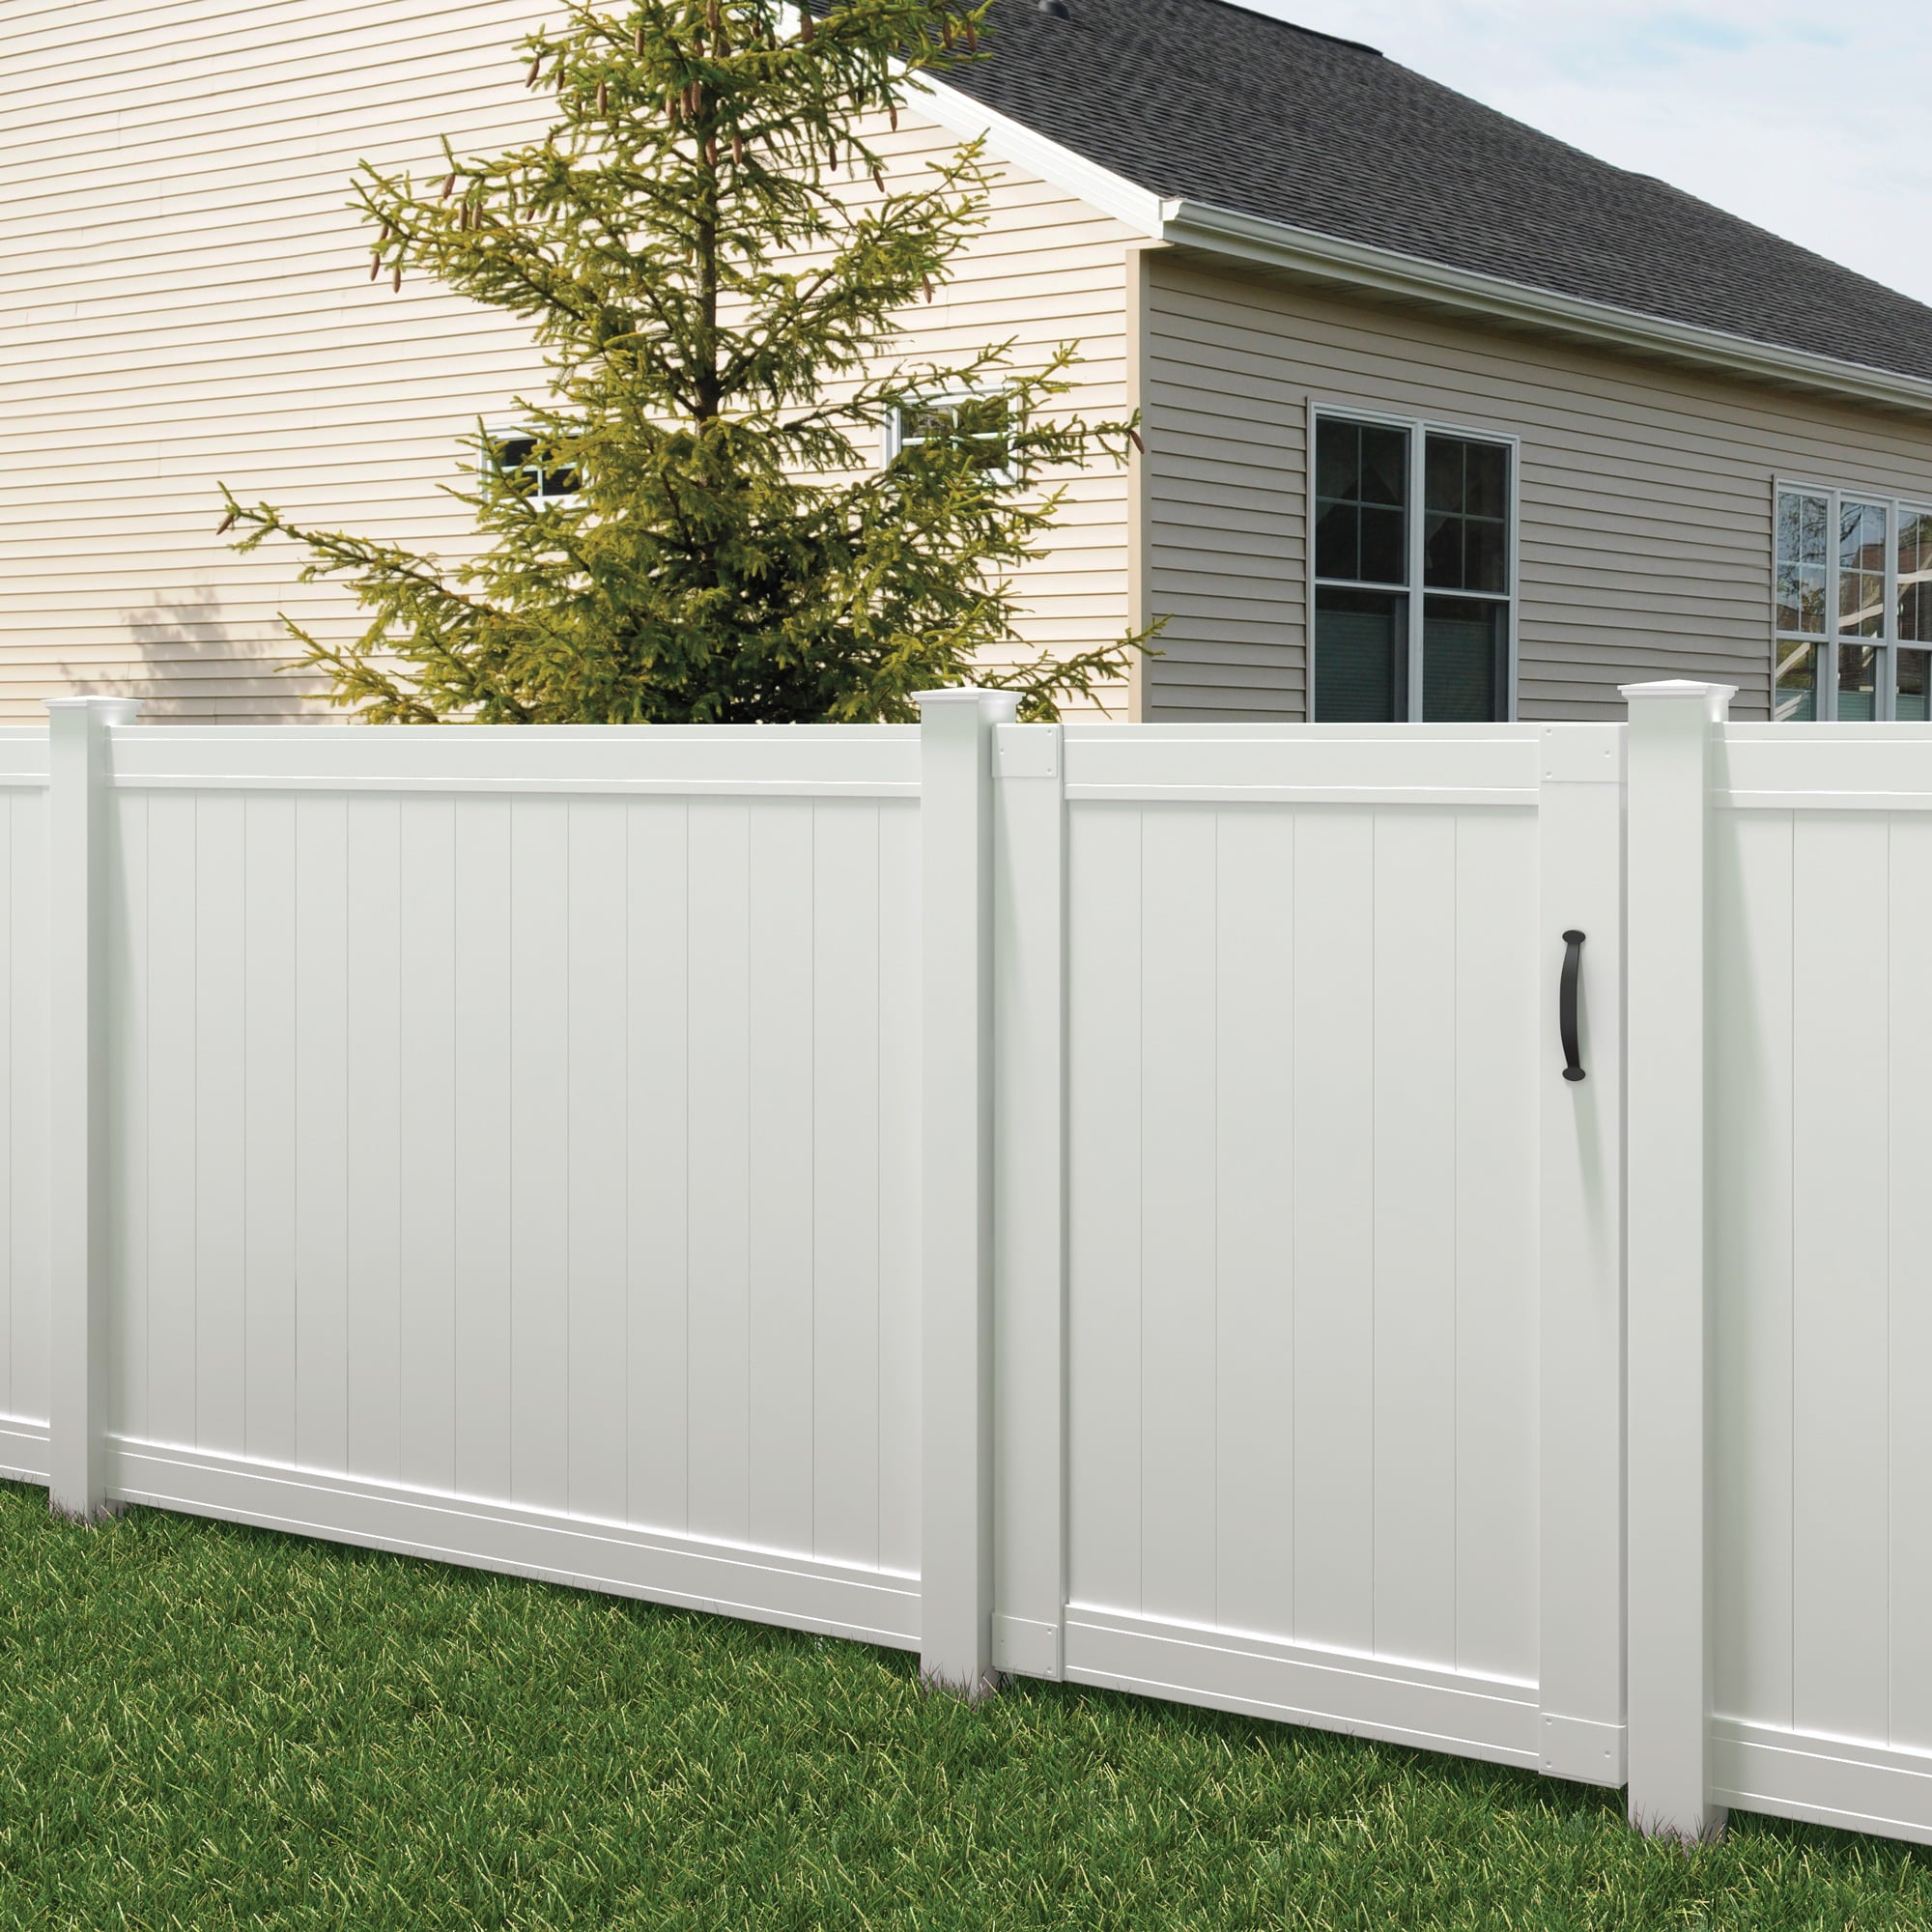 Outdoor Essentials Pro Series 4x6 Lakewood White Vinyl Privacy Fence Panel